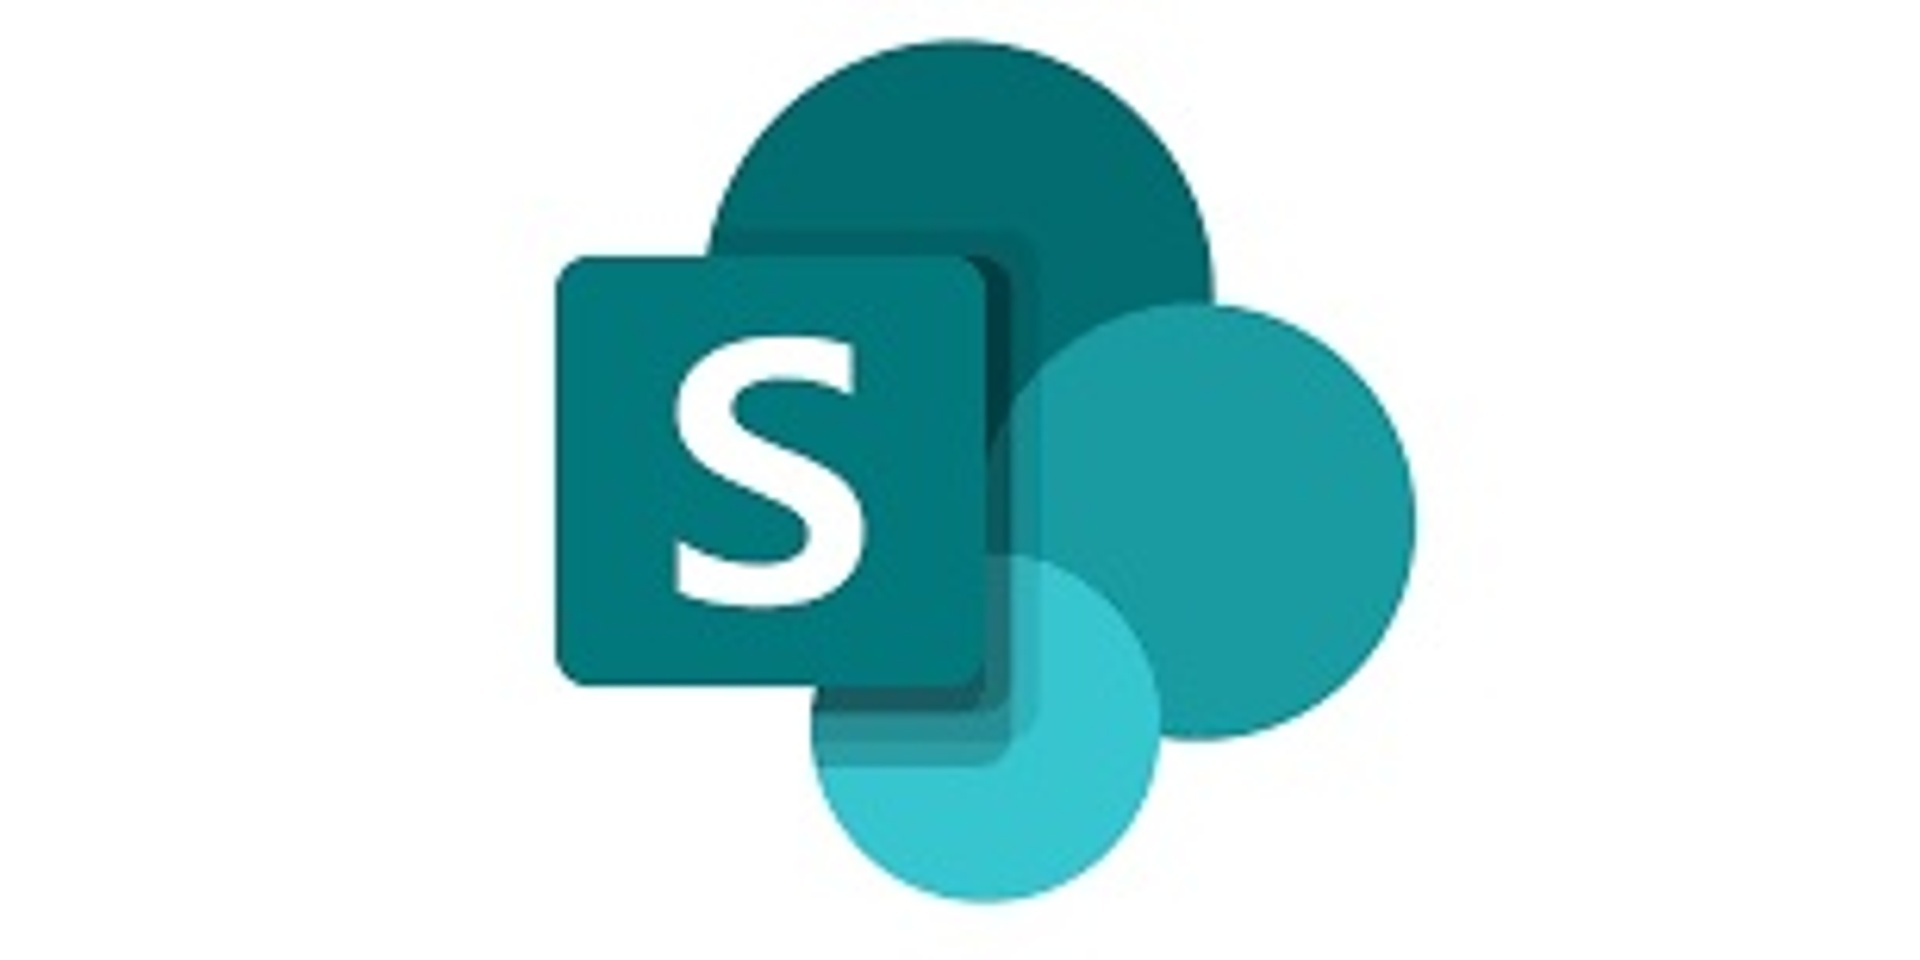 SharePoint Online/2019 for End Users, Training Course in Canberra